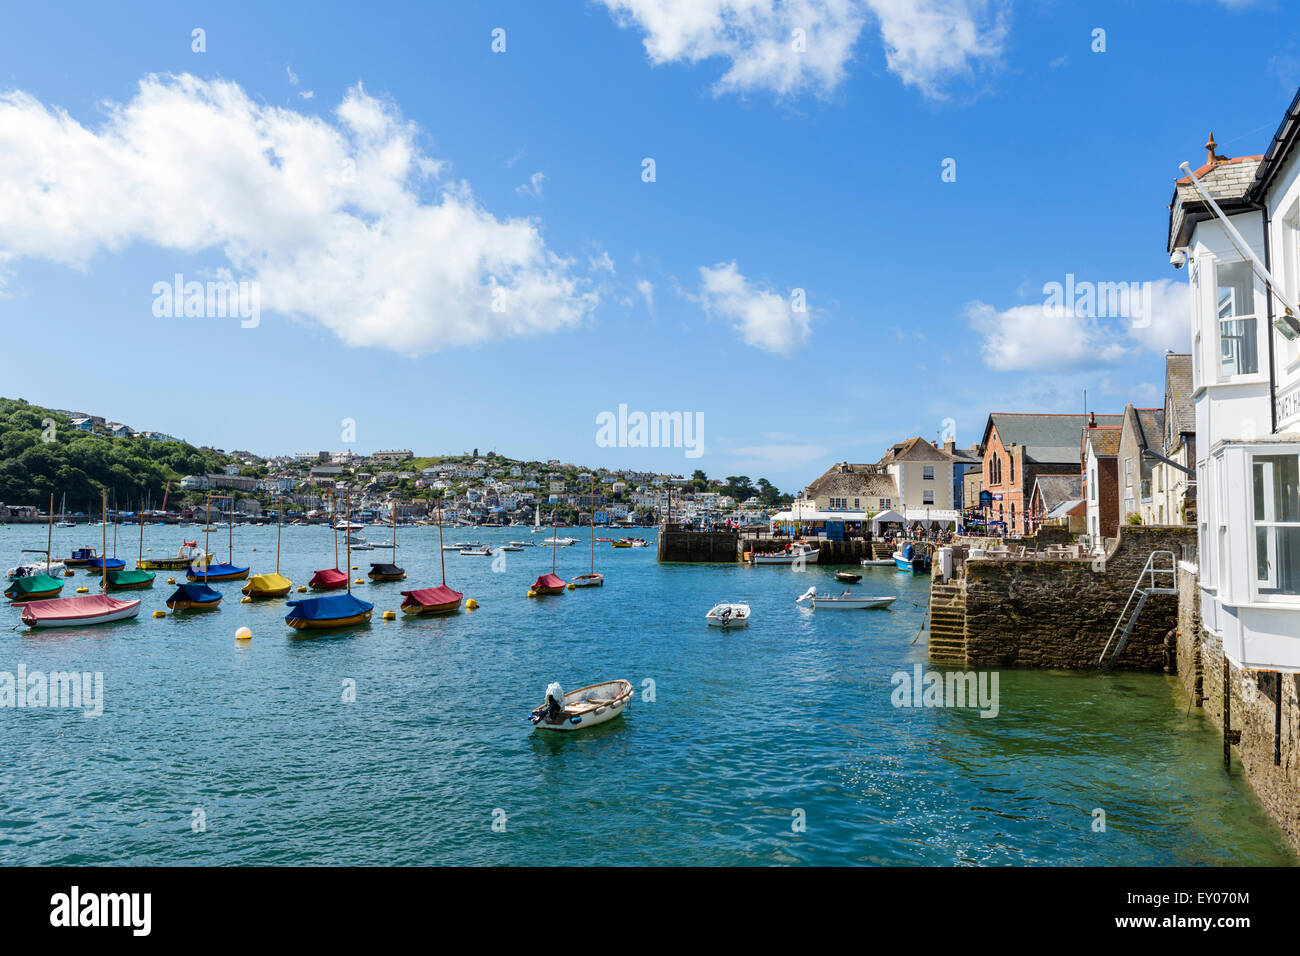 The harbour in Fowey looking across the river to Polruan, Cornwall, England, UK Stock Photo